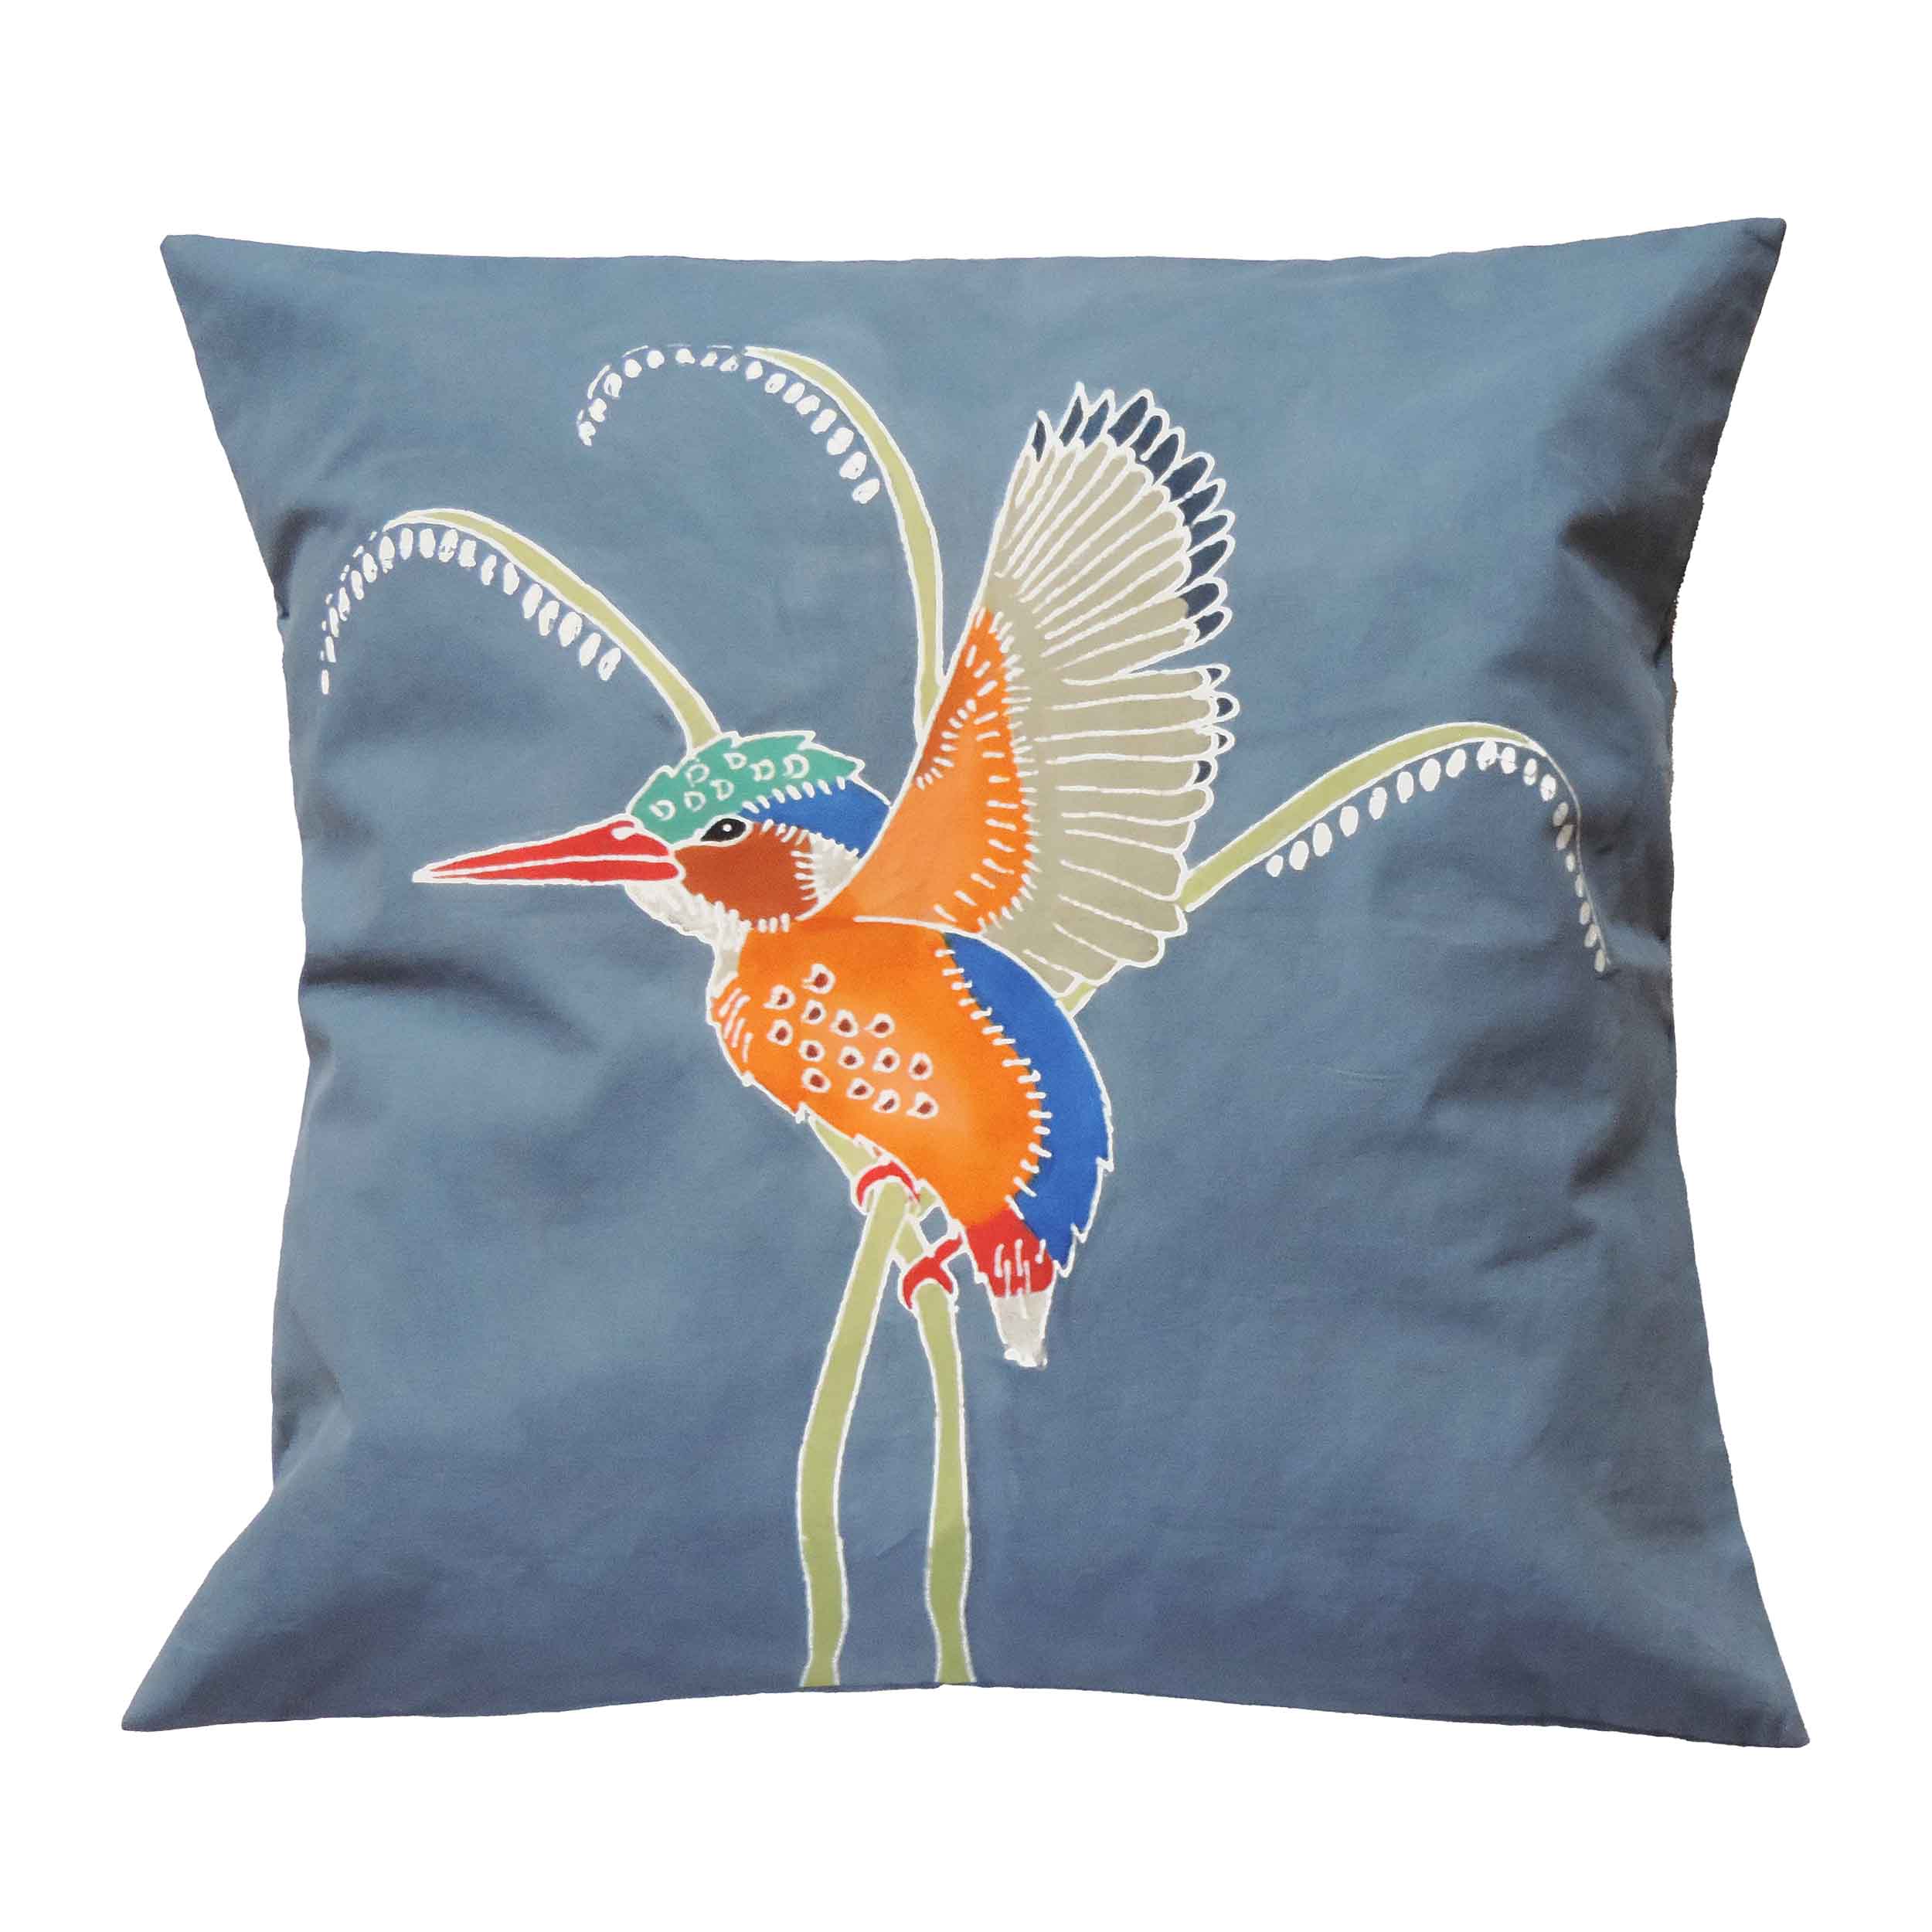 Papiko Malachite Kingfisher Cushion Cover - Hand Painted by TRIBAL TEXTILES - Handcrafted Home Decor Interiors - African Made